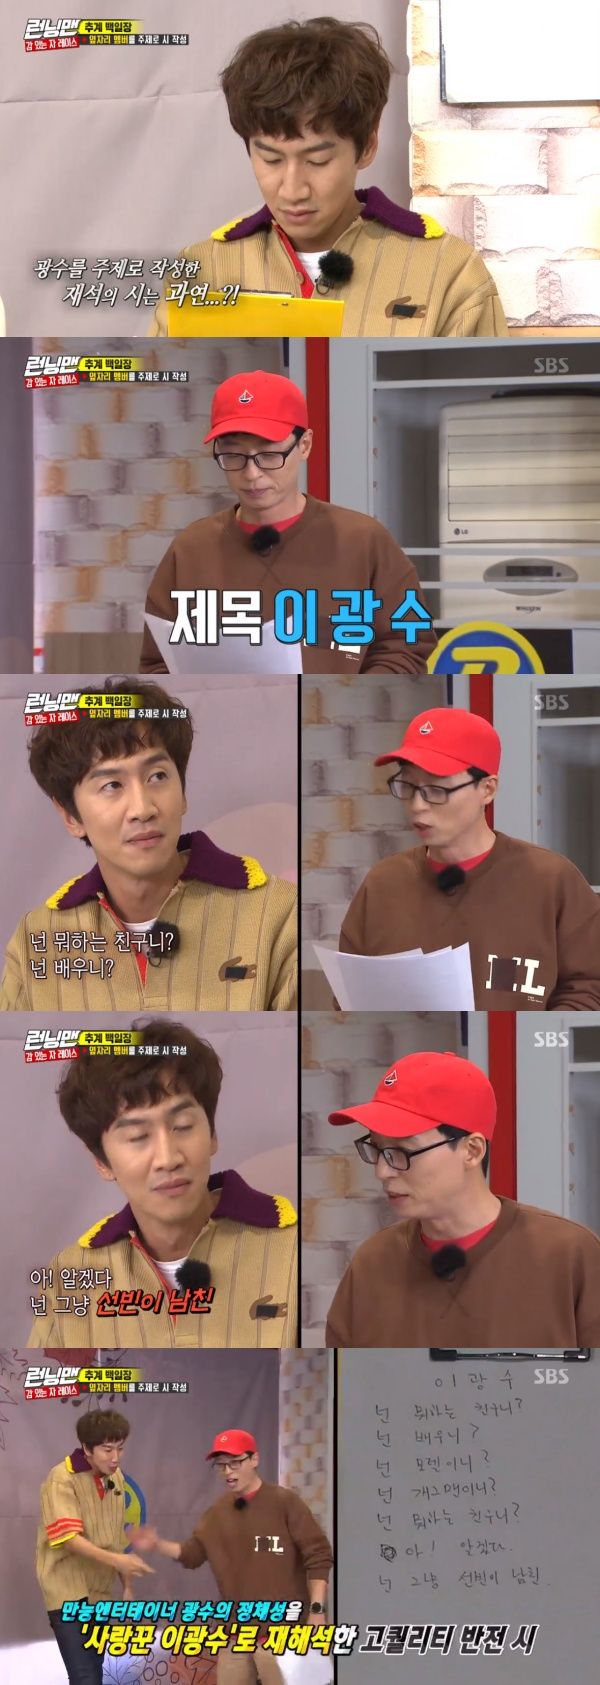 Running Man Yoo Jae-Suk mentioned the romance rumor of Lee Kwang-soo and Lee Sun-bin.On the 6th SBS entertainment program Running Man, the members of the autumn festival were drawn up and the members who wrote the poem on the theme of the next member were drawn.On that day, Yoo Jae-Suk wrote a poem on the subject of Lee Kwang-soo, followed by the first to announce it.The title is Lee Kwang-soo, what are you doing, youre a friend, an actor, a comedian, a model, Yoo Jae-Suk began to recite the poem.Yoo Jae-Suk then added: Oh I get it, you just Sunbin is your boyfriend.Lee Kwang-soo, who stepped up and asked, What is this?